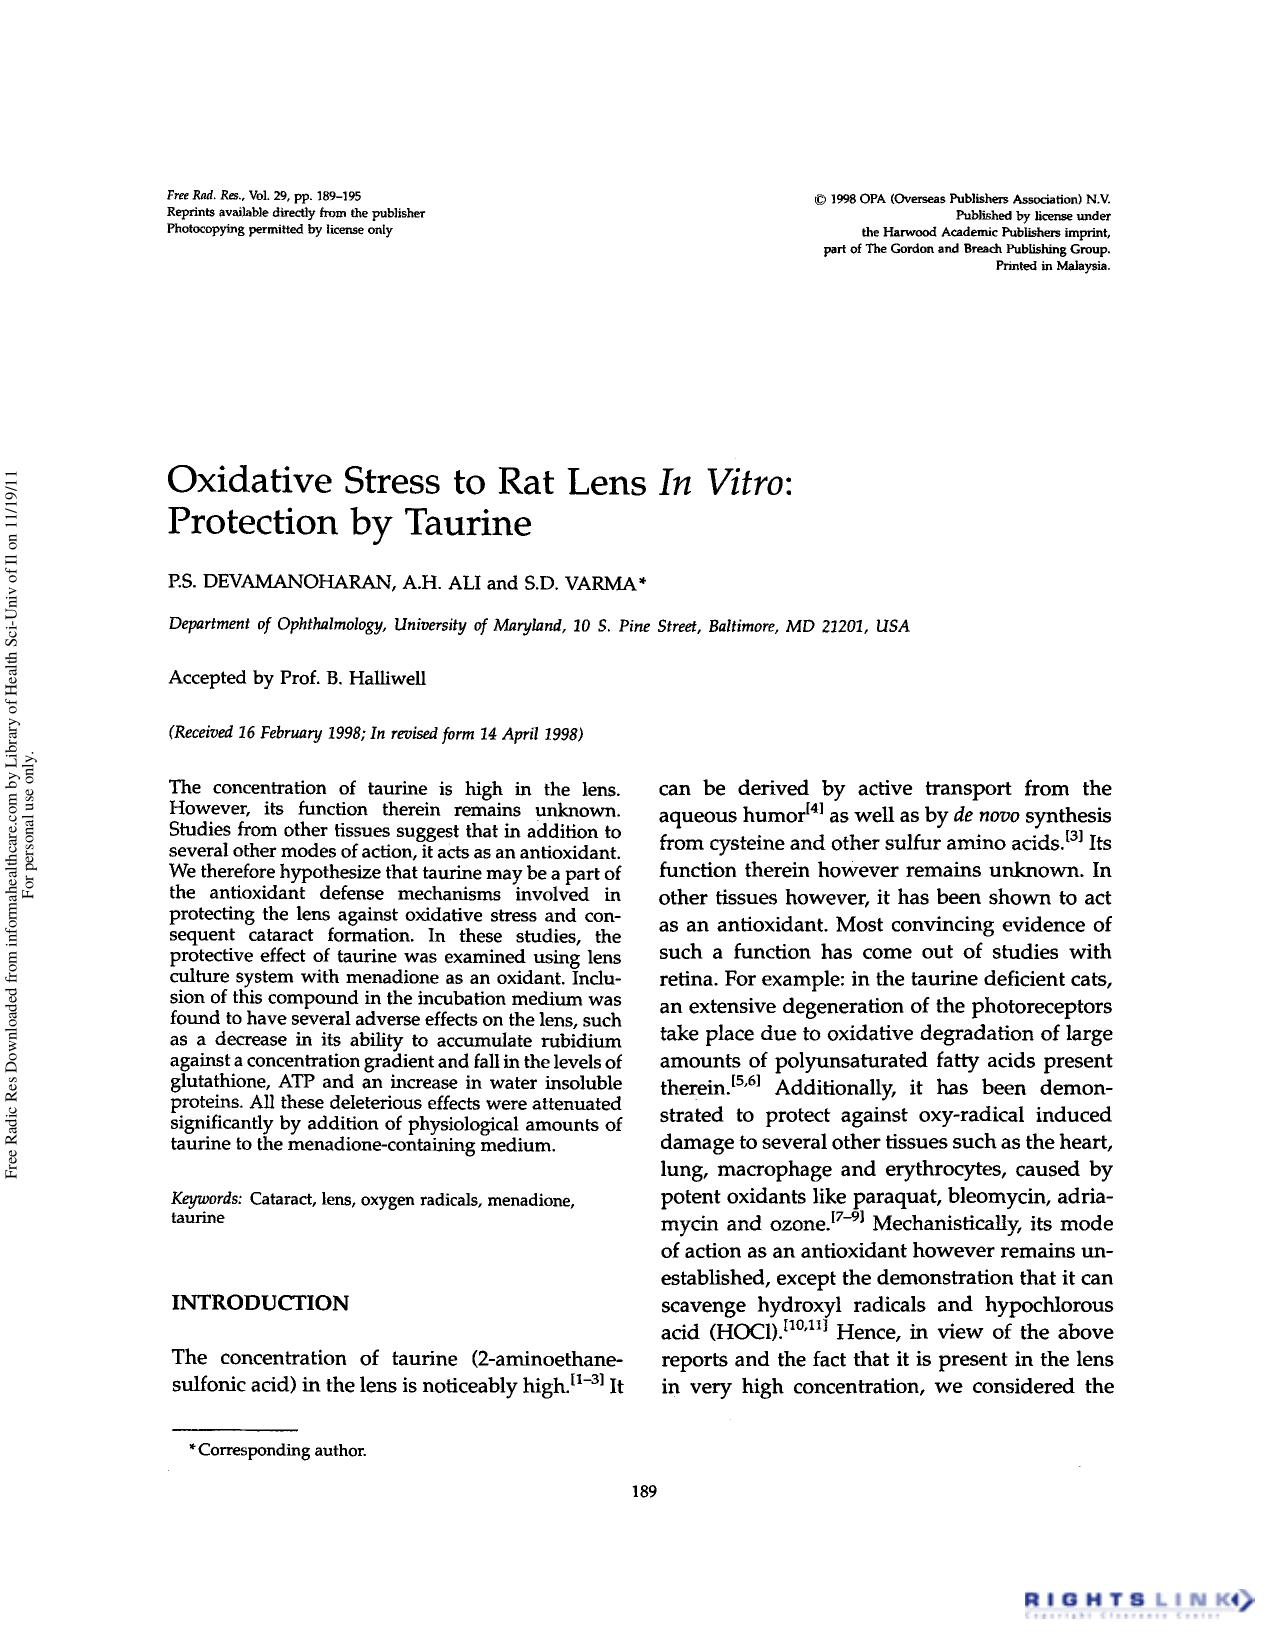 Oxidative stress to rat lens in vitro: Protection by taurine by P.S. Devamanoharan A.H. Ali & S.D. Varma